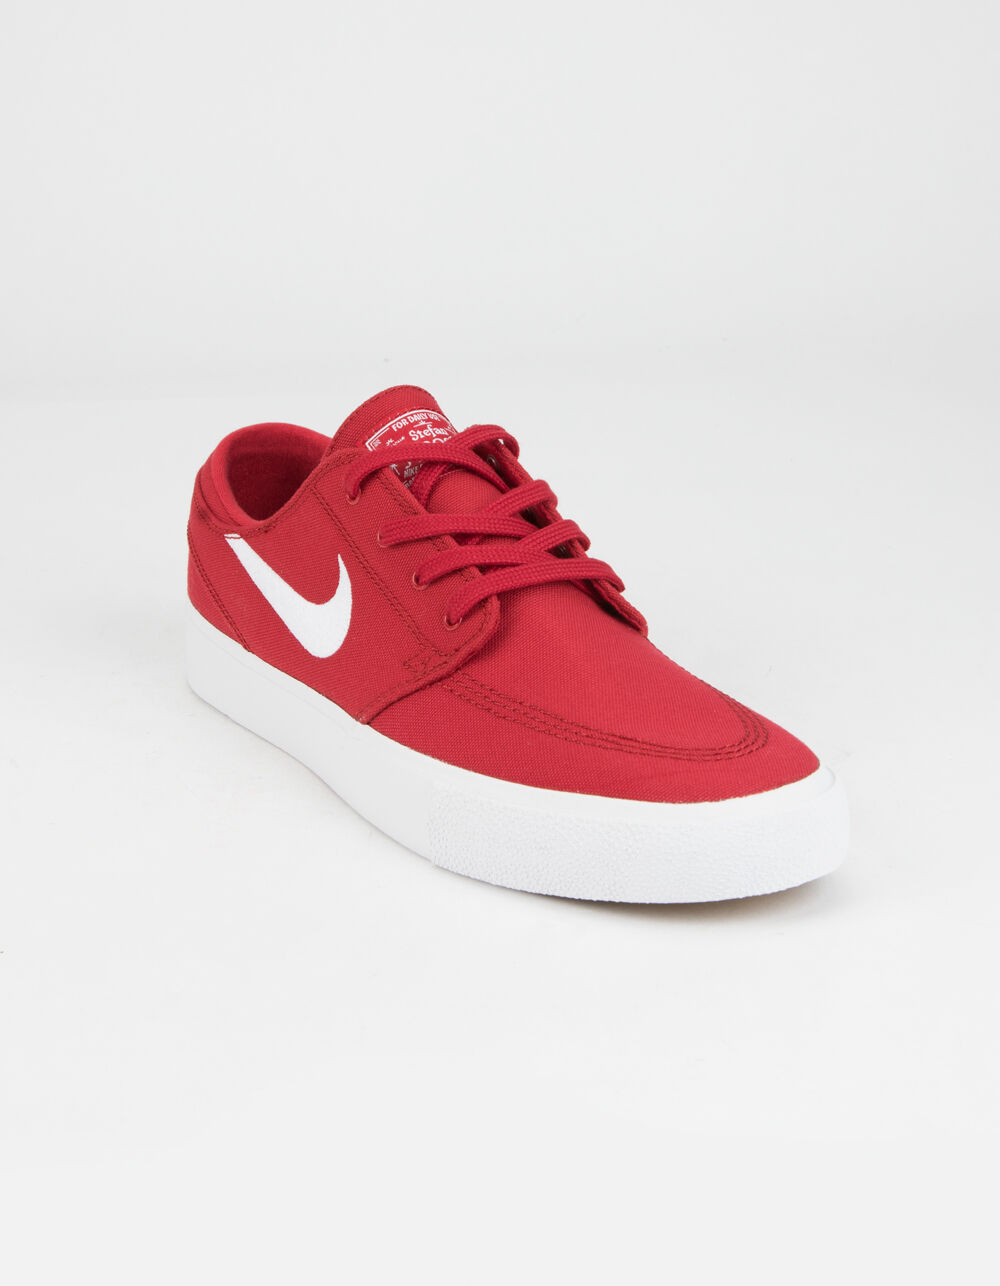 NIKE SB Janoski Canvas RM Red Shoes - RED |